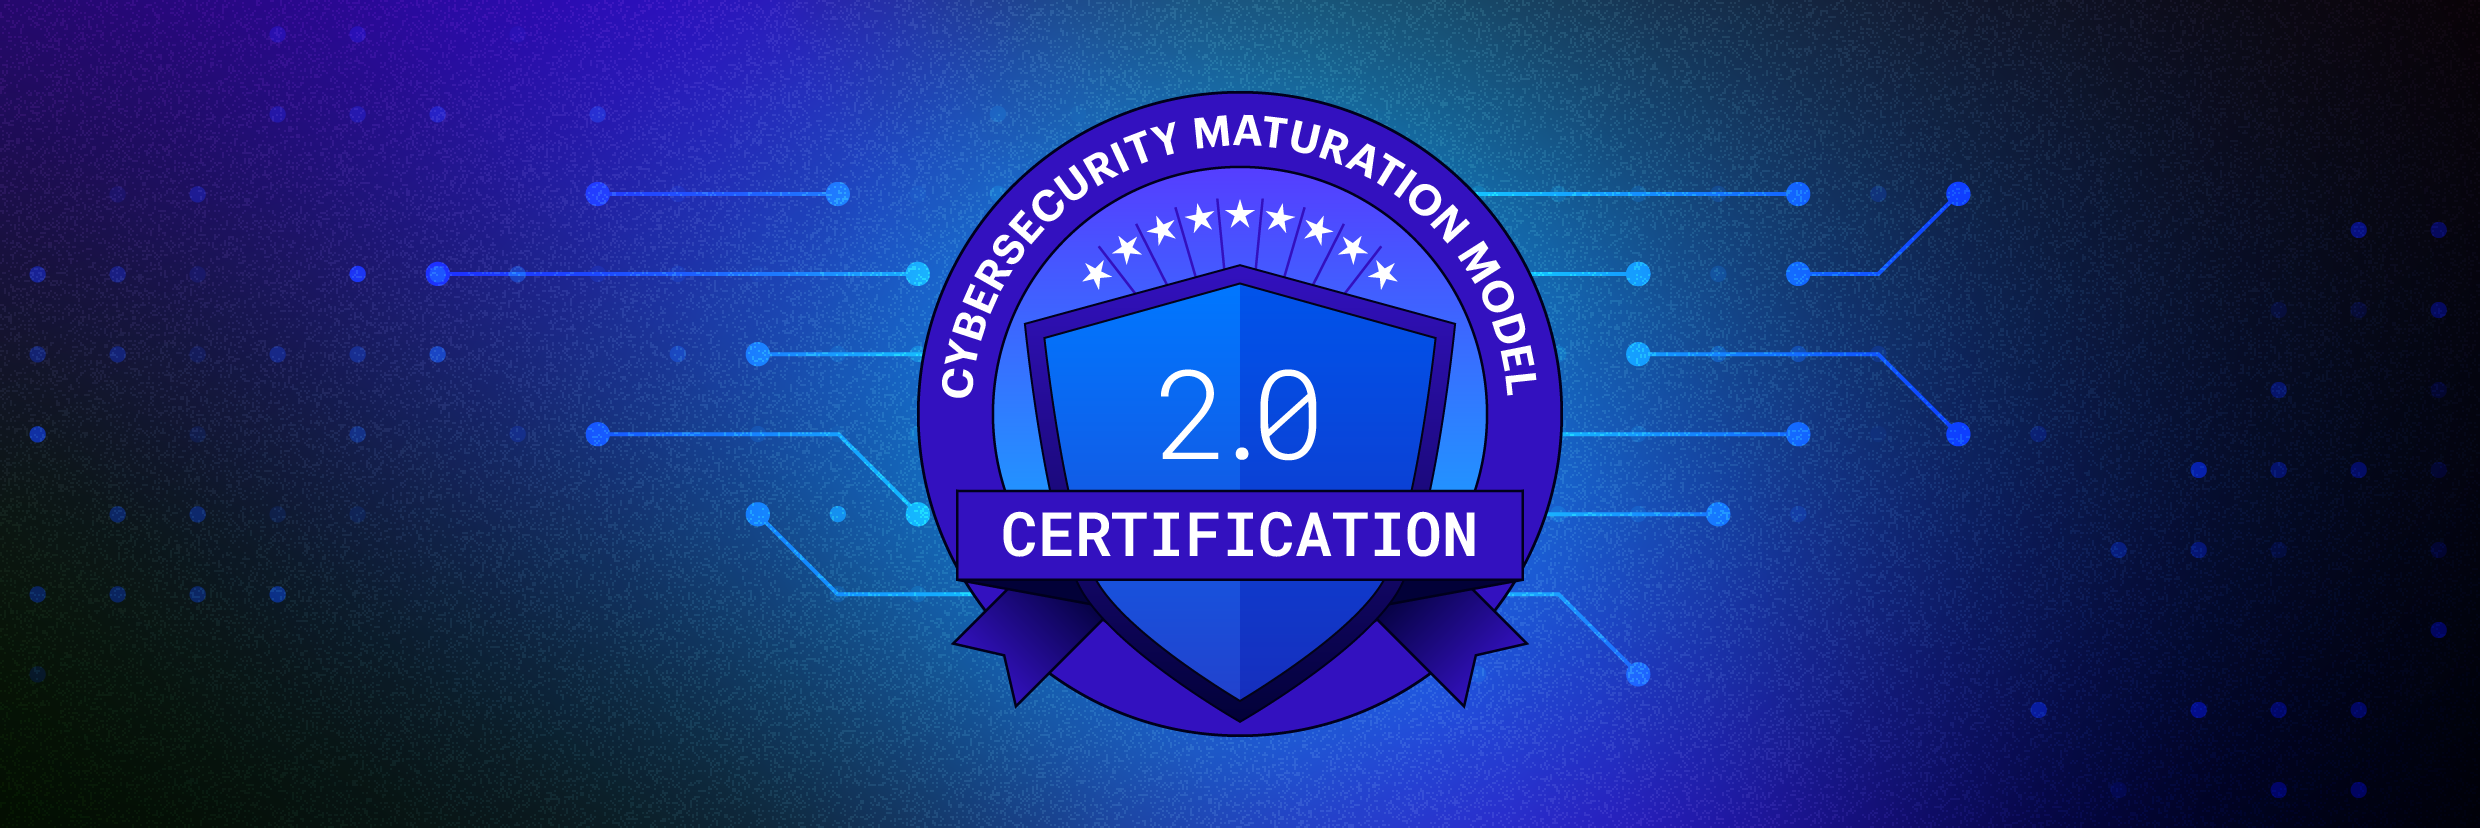 cybersecurity-maturation-model-certification-2.0:-how-varonis-ensures-certification-for-defense-contractors